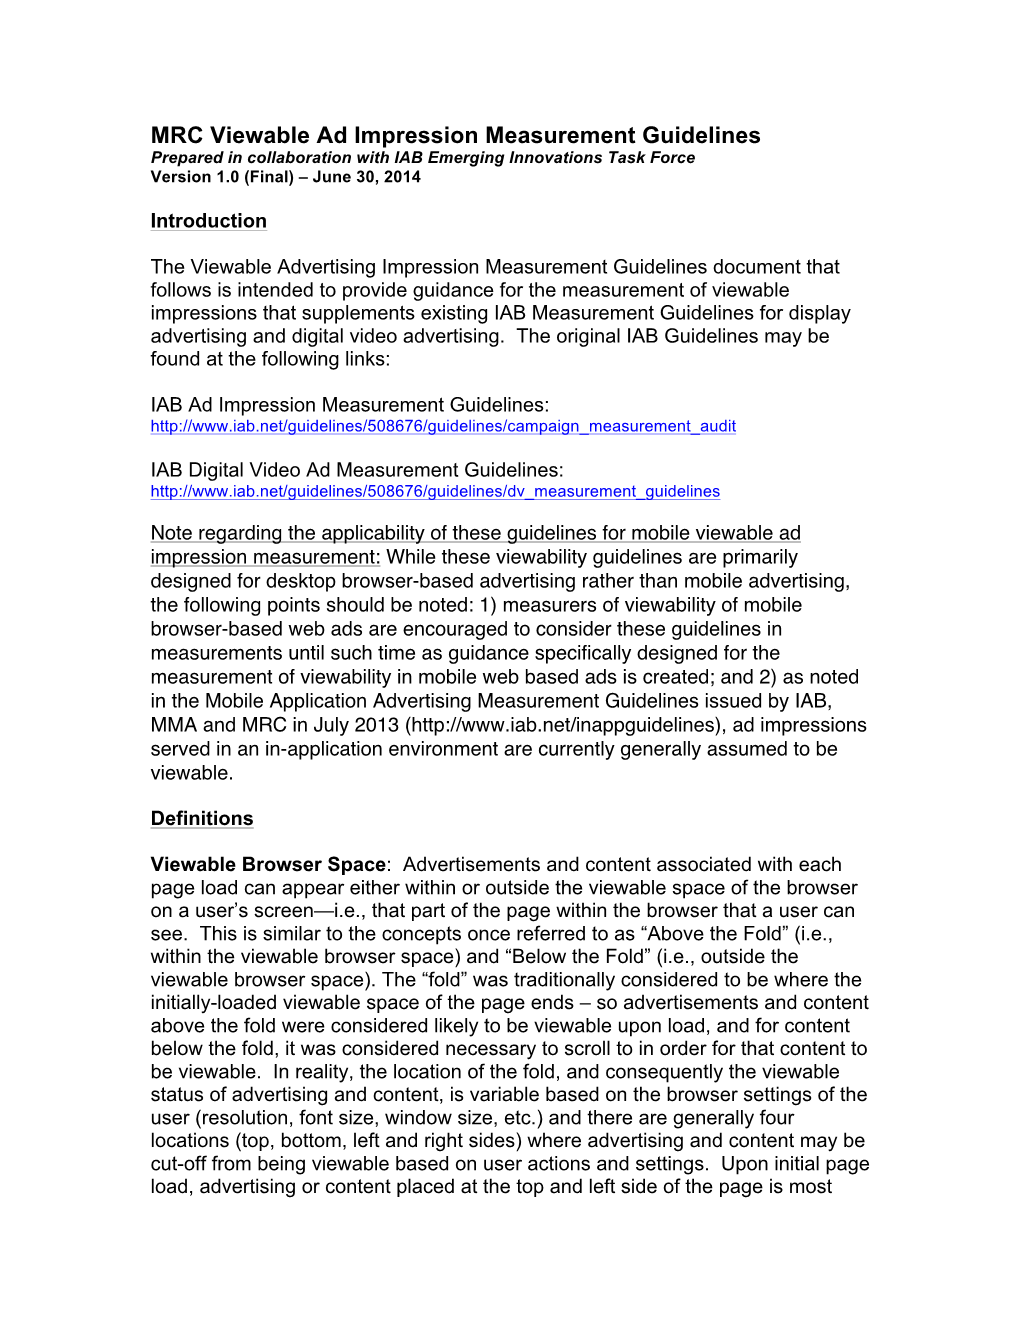 MRC Viewable Ad Impression Measurement Guidelines Prepared in Collaboration with IAB Emerging Innovations Task Force Version 1.0 (Final) – June 30, 2014